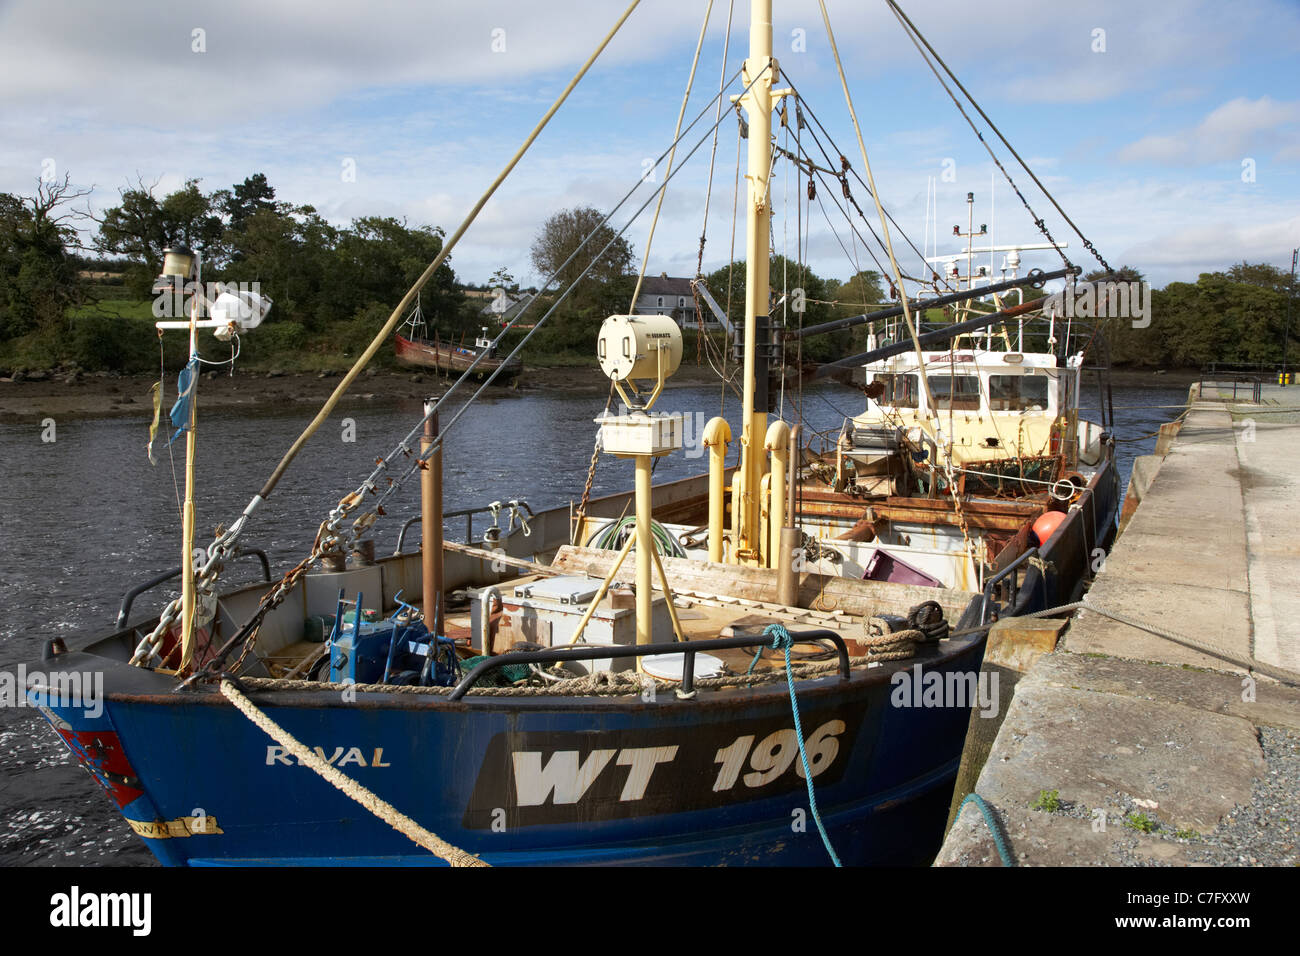 fishing boats on the quay at the river lennon ramelton county donegal republic of ireland Stock Photo